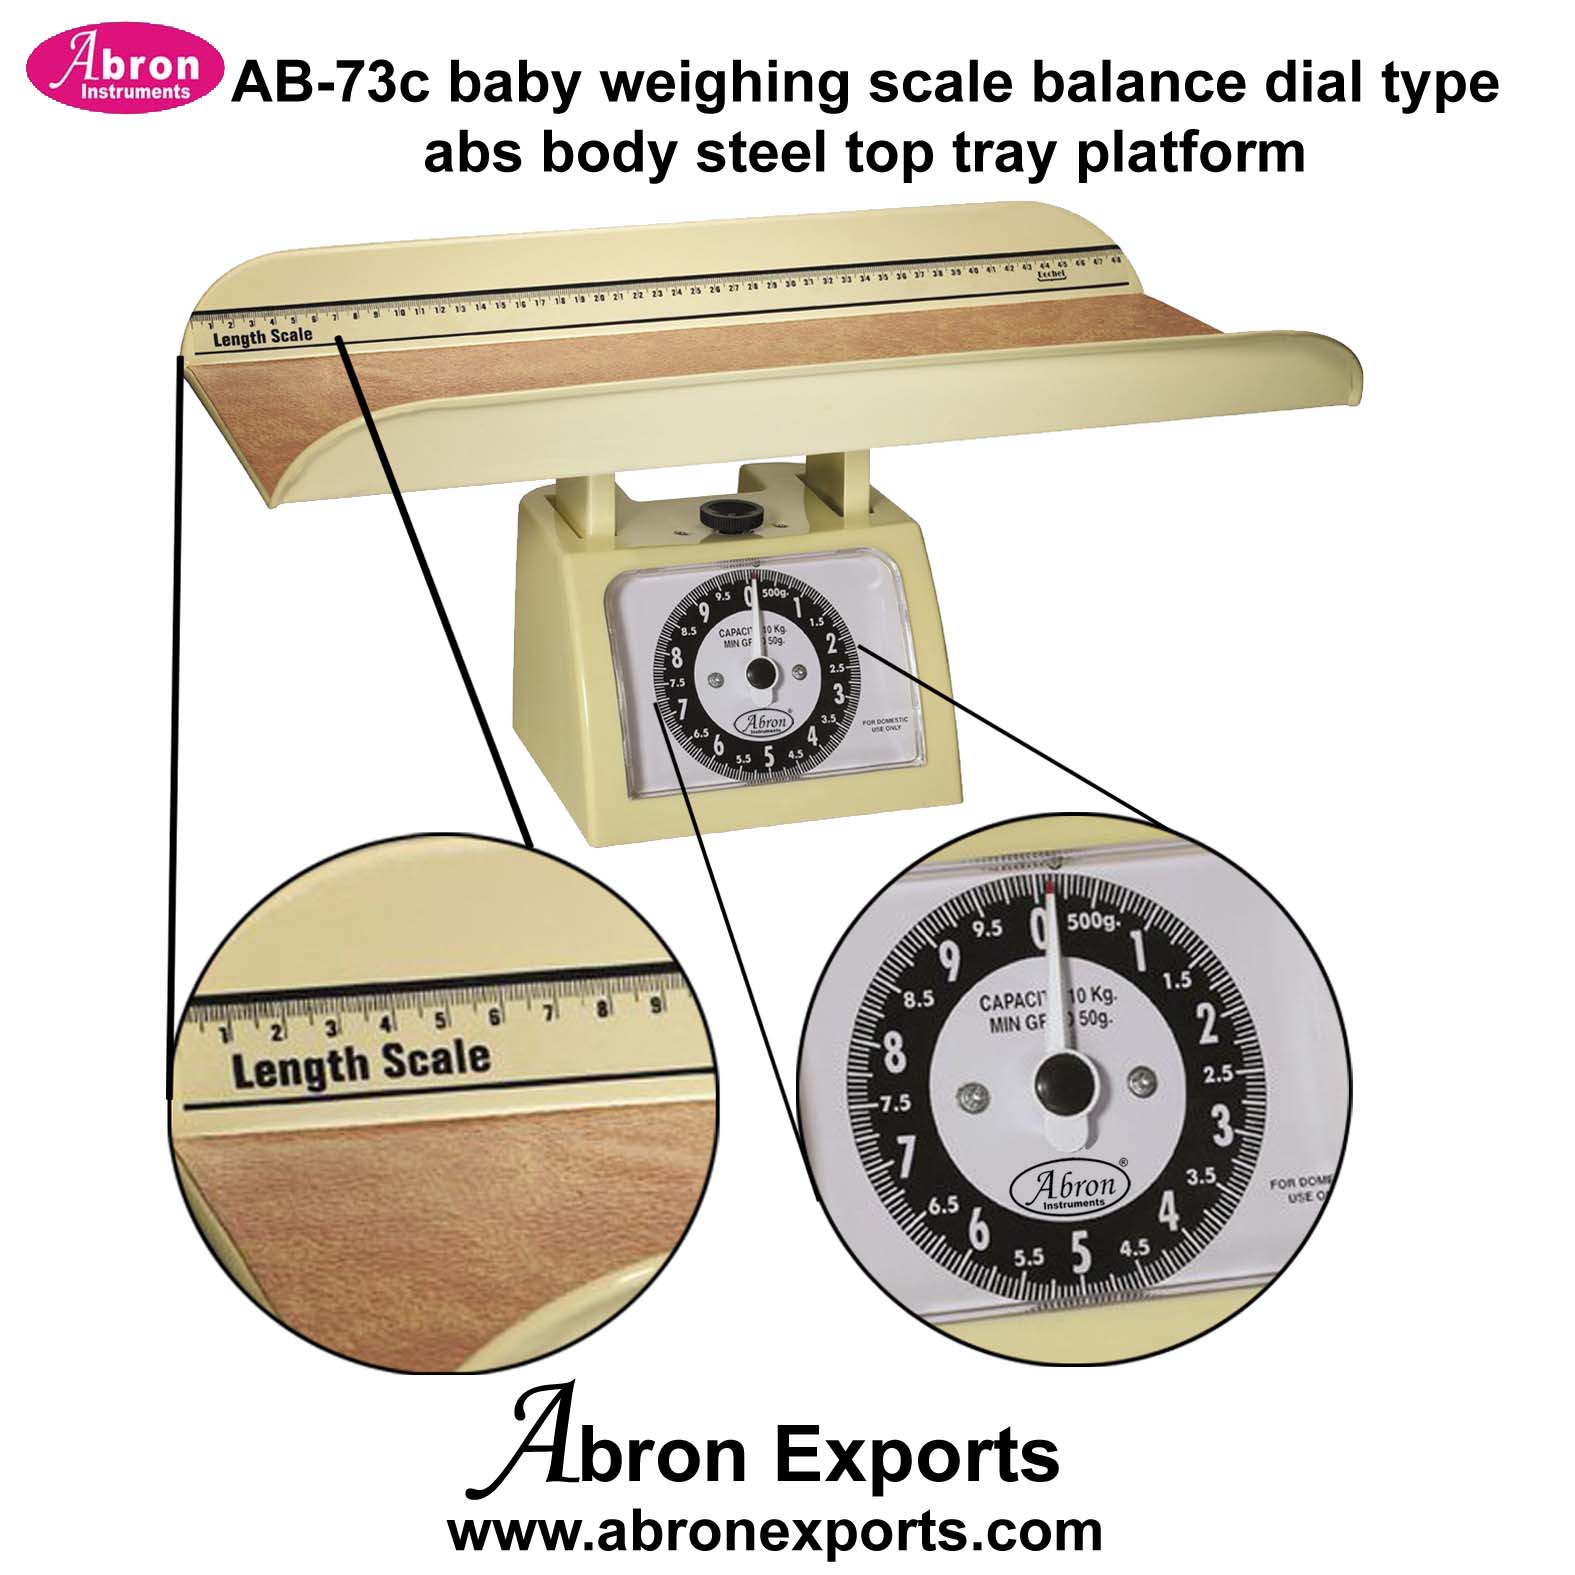 Baby Weighing Scale Dial Type abs body steel top tray platform Balance Abron ABM-3255BM 